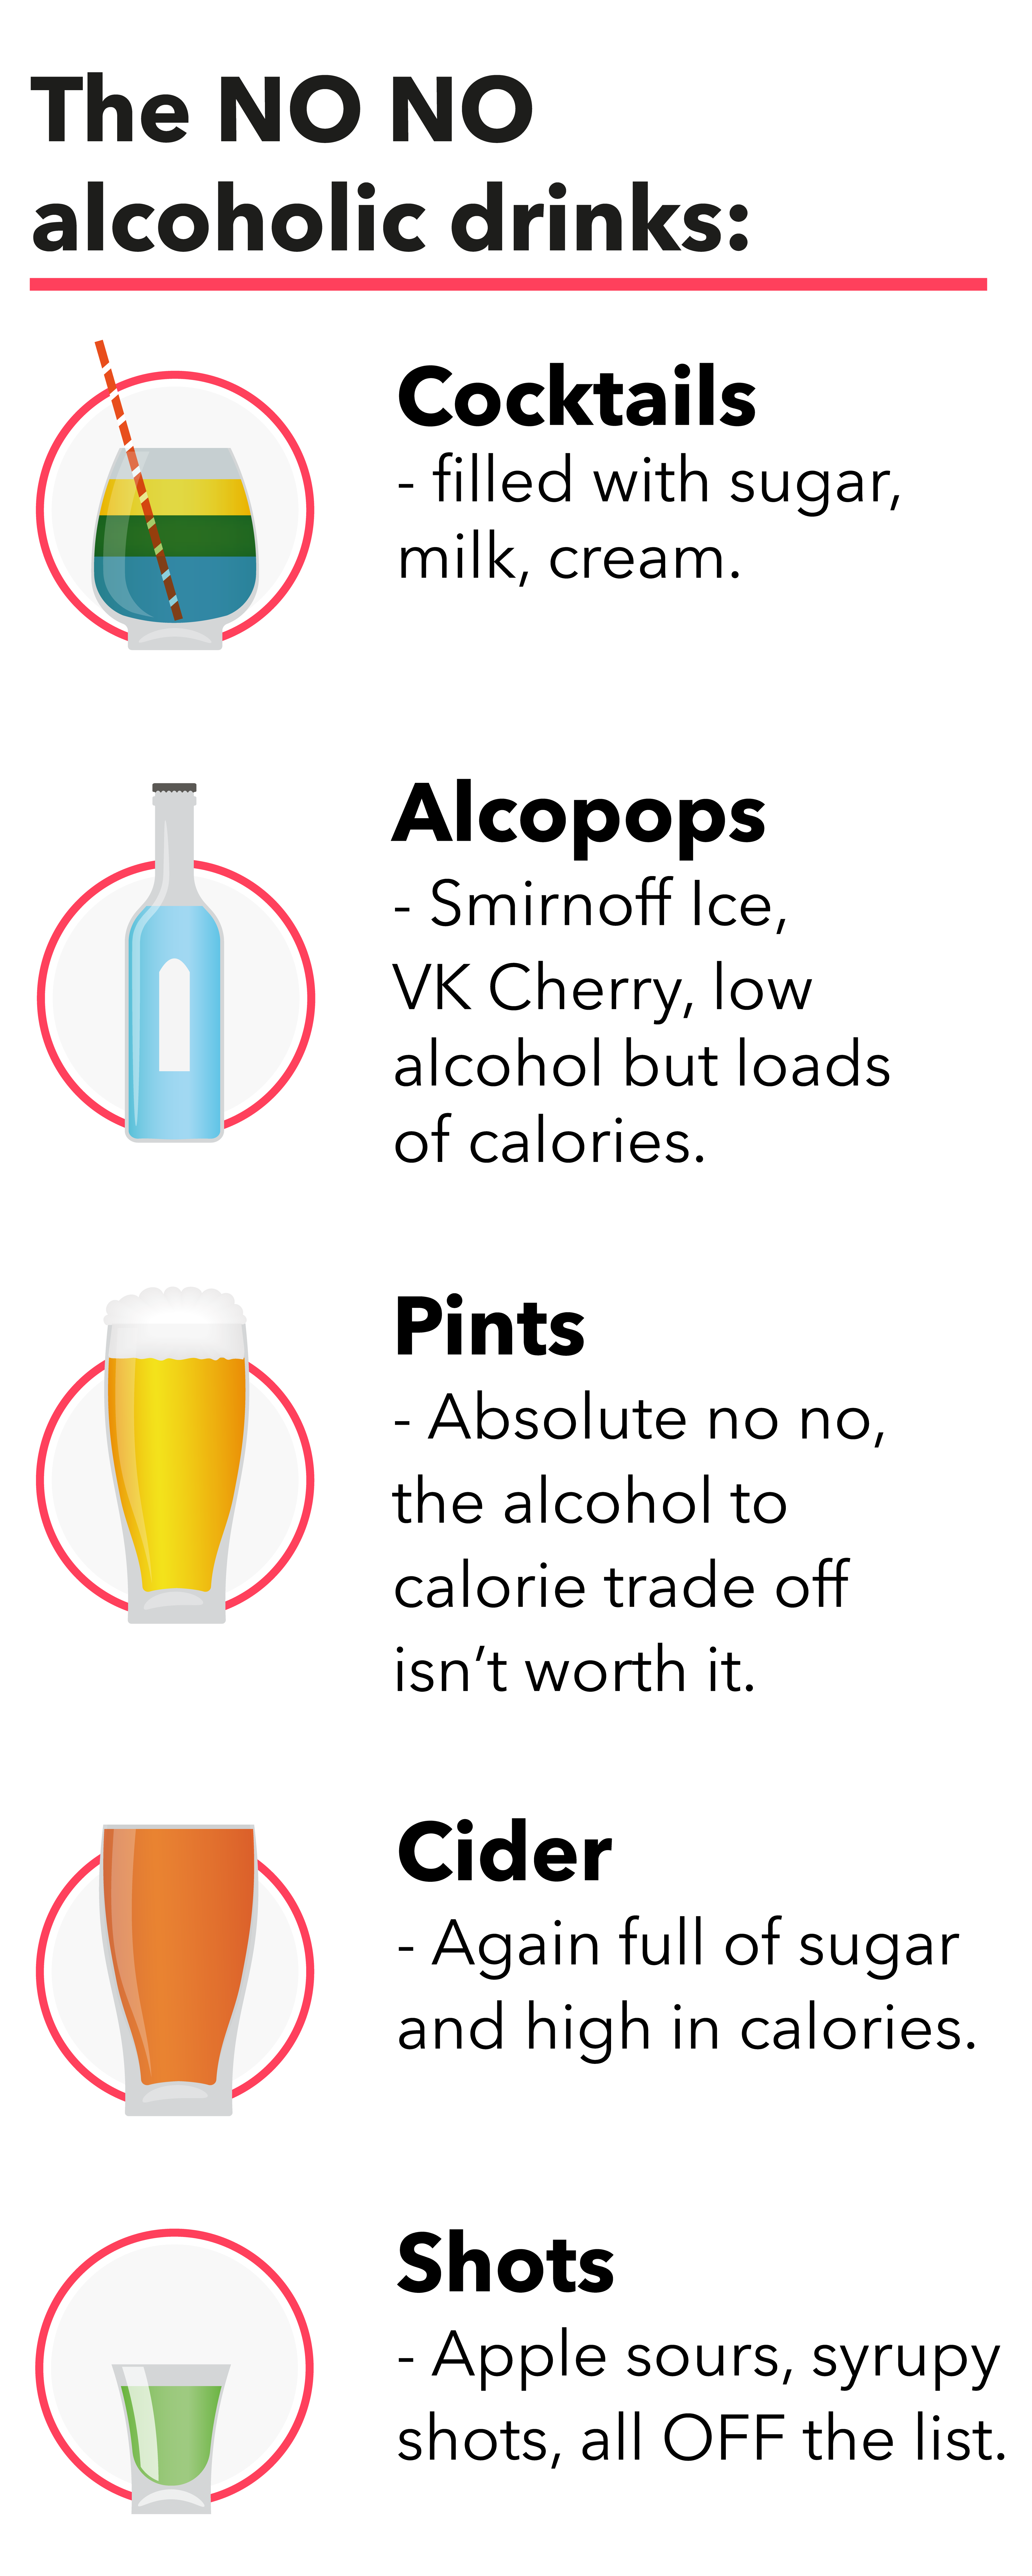 _Best alcohol to choose for weight loss - NO NO Drinks.png